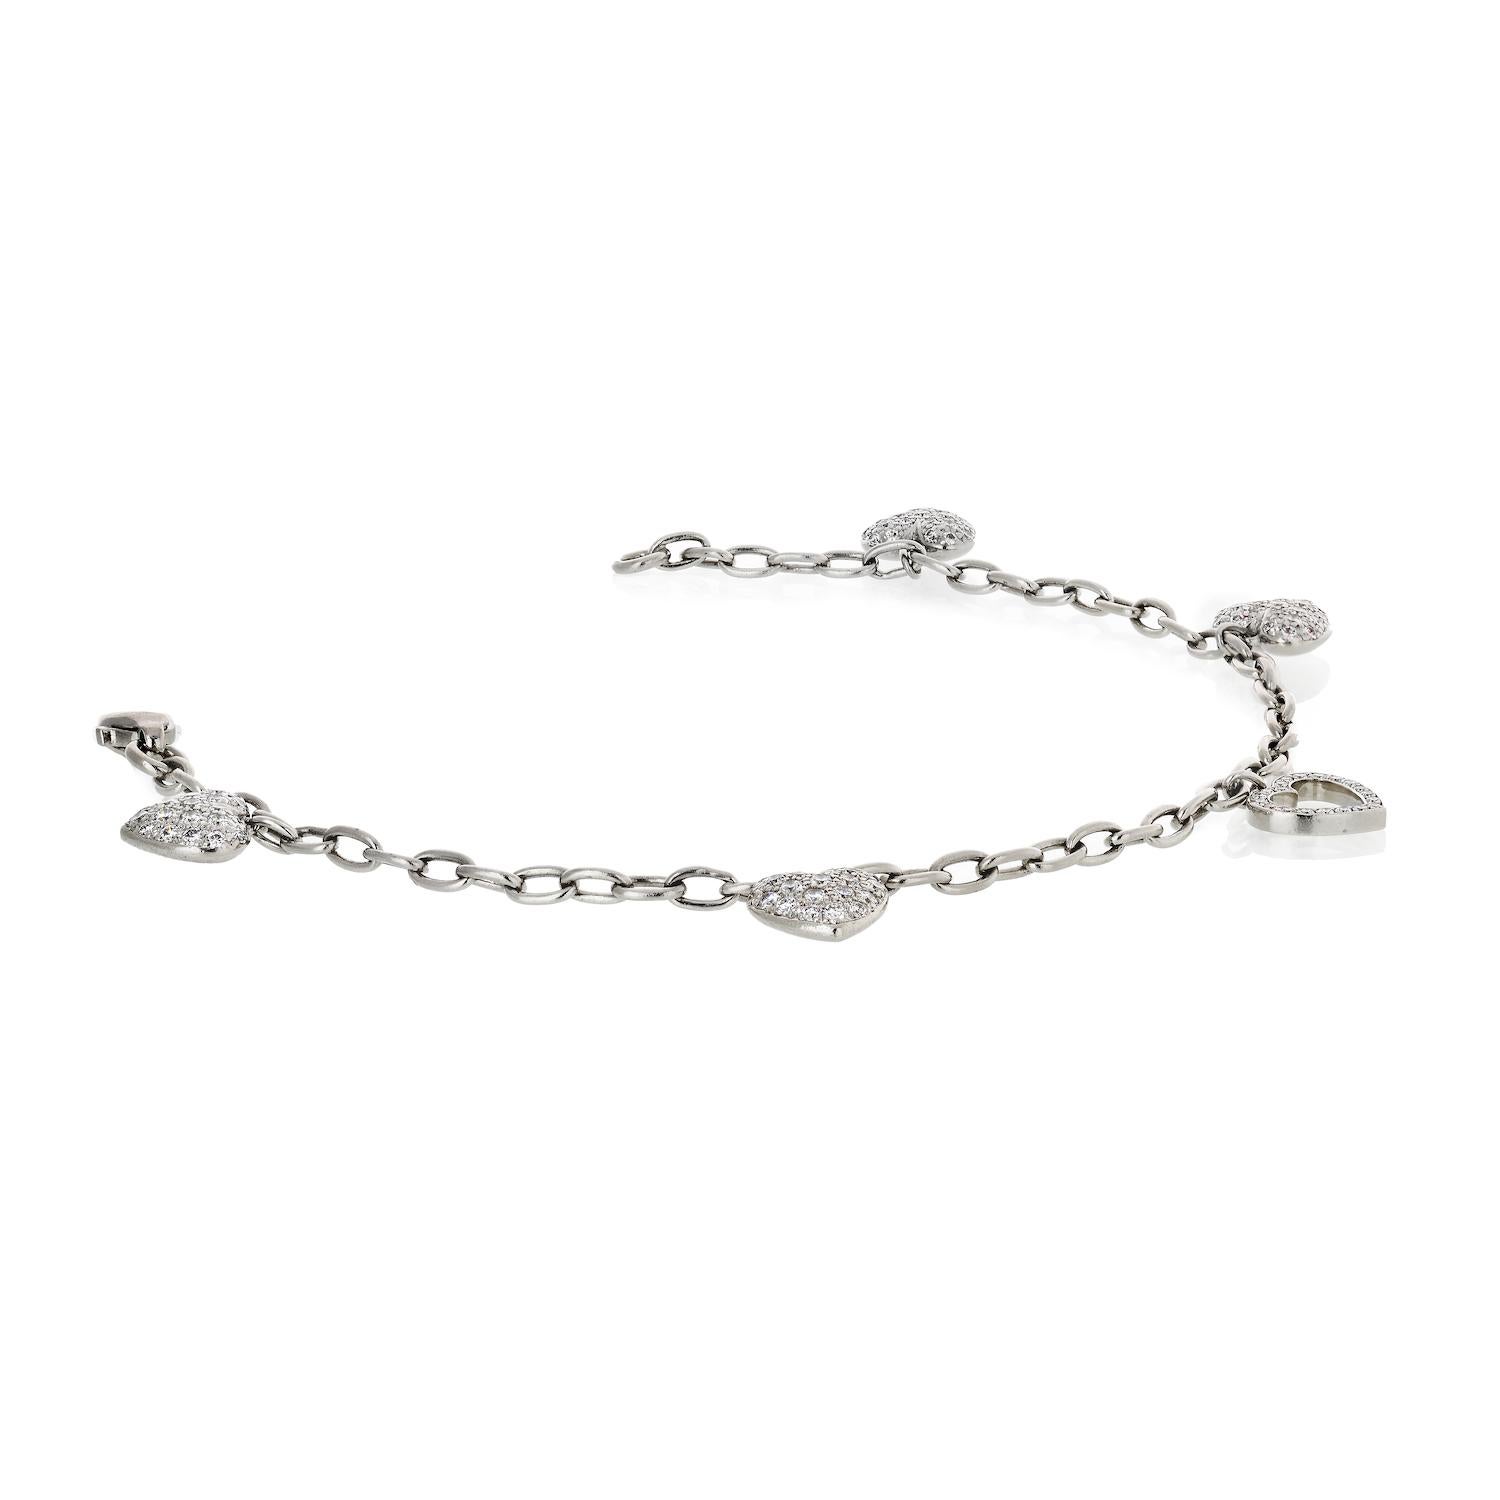 Lovely and cute charm bracelet created by Tiffany & Co. in France in 2003. 

Feminine, delicate and wearable, the bracelet is a great addition to your jewelry collection and perfect gift.

The bracelet and the charms are made of platinum, the charms